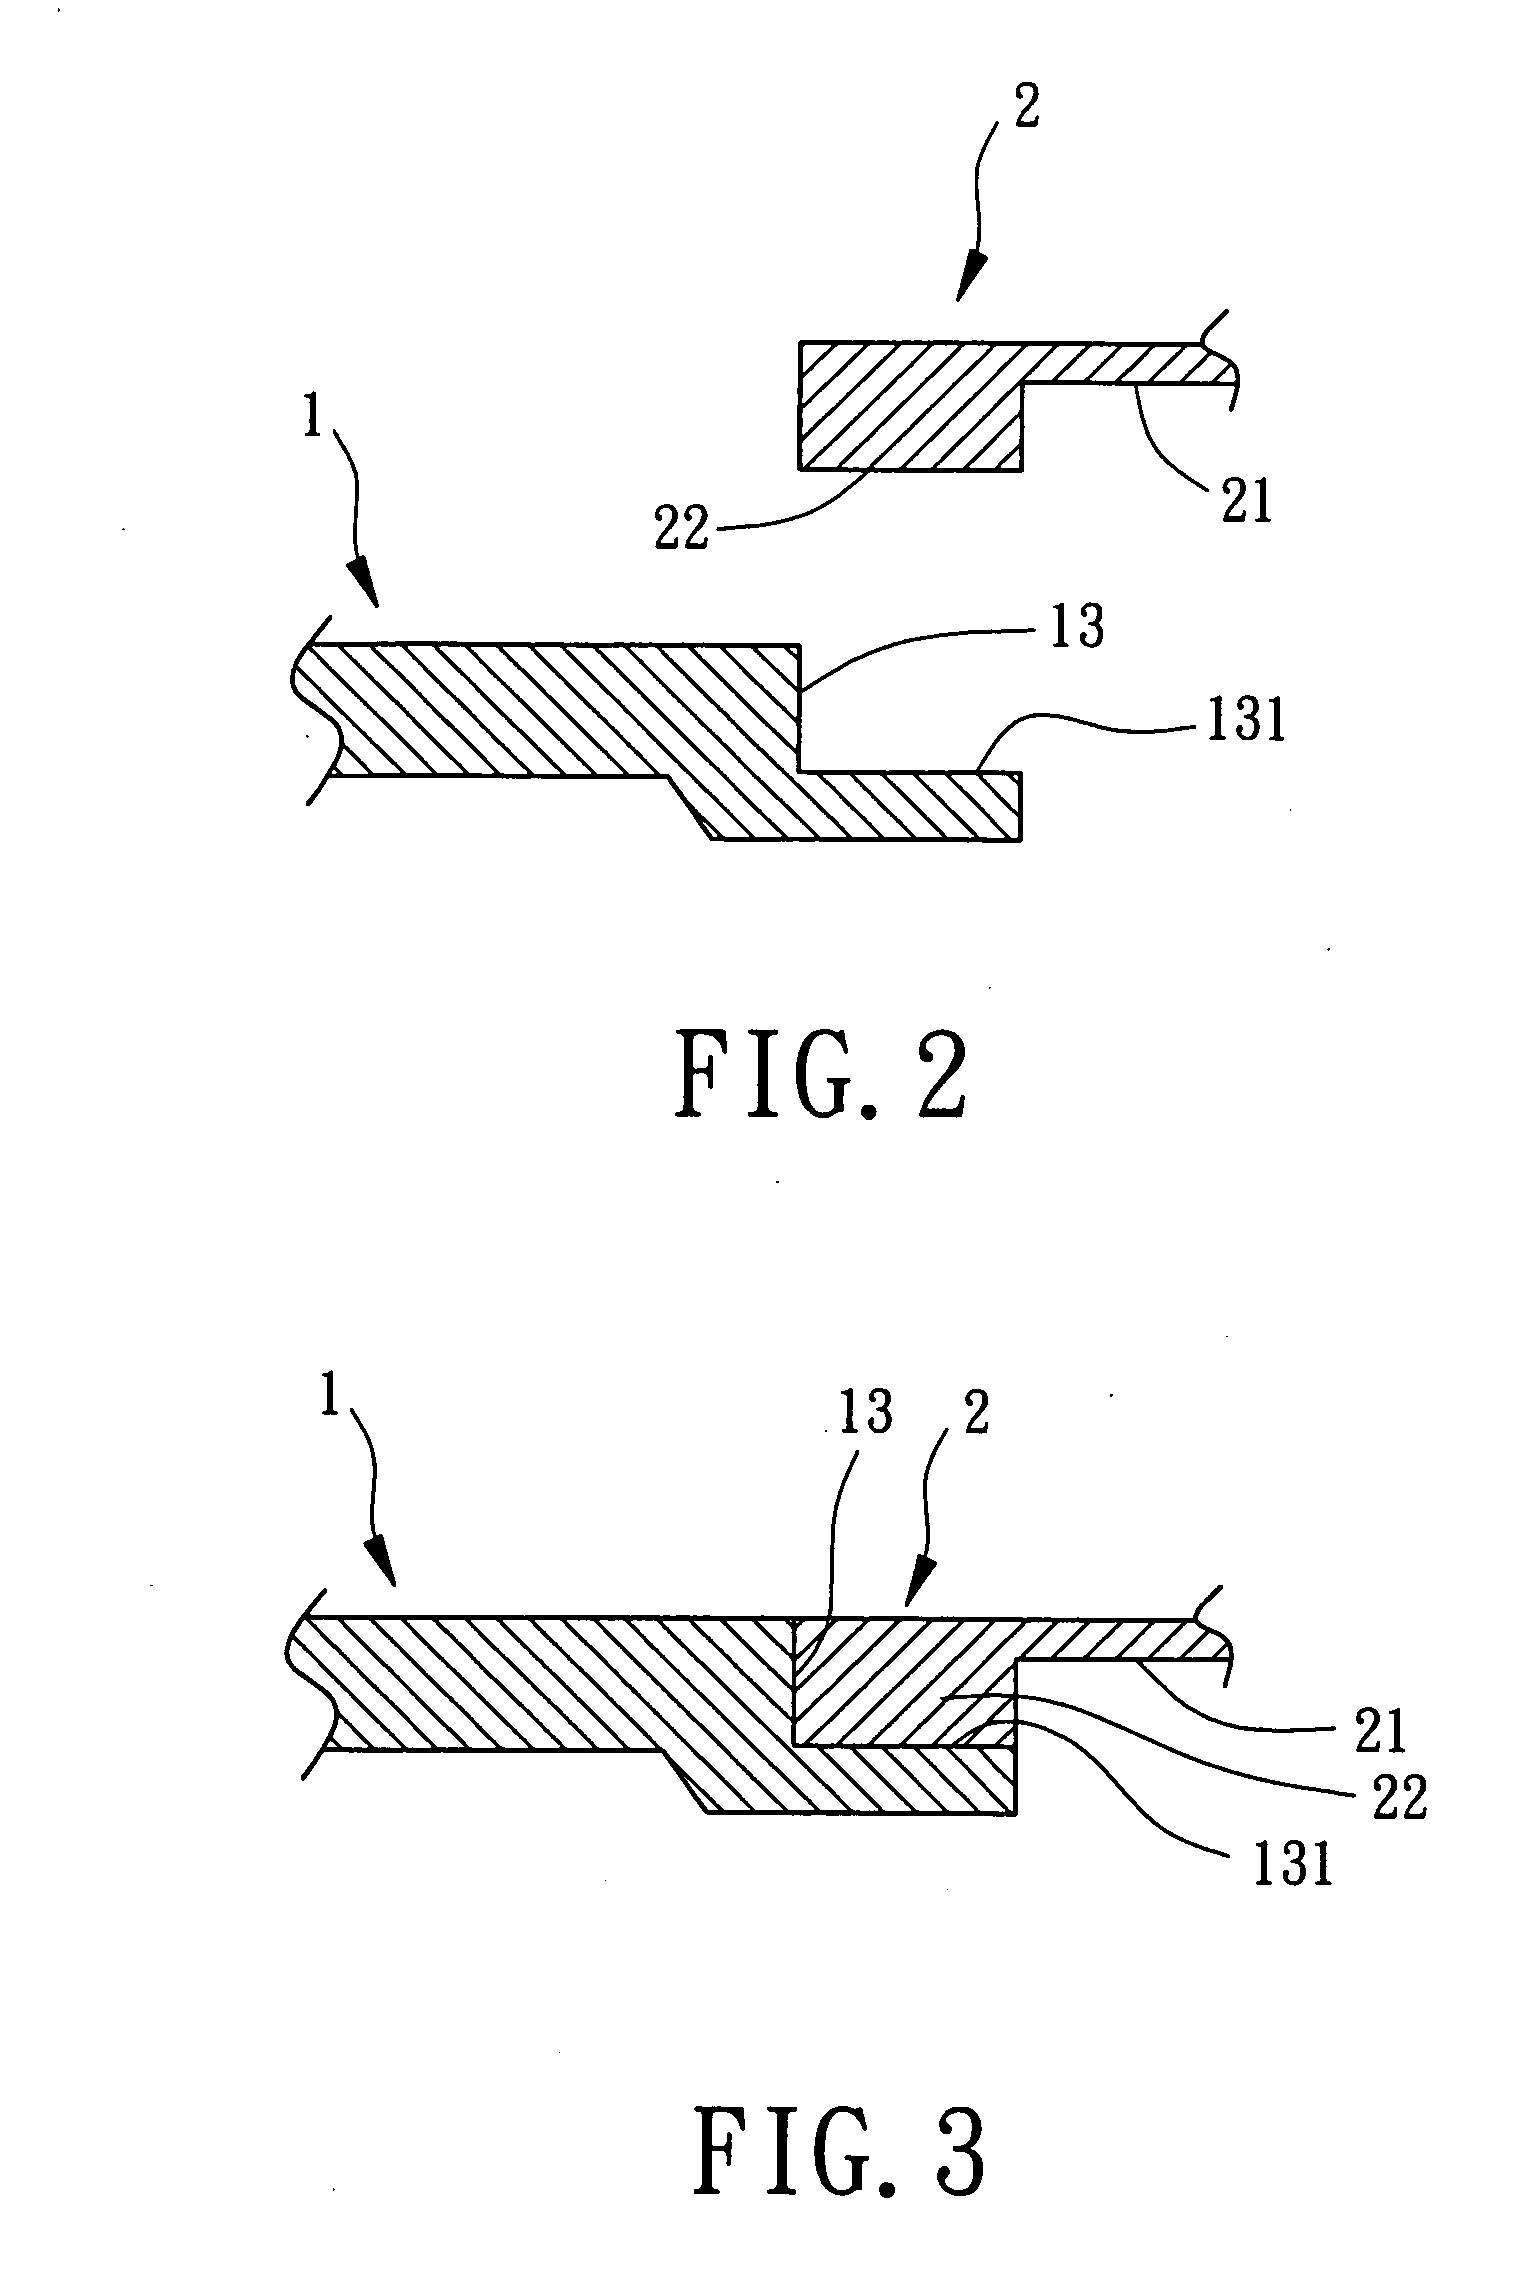 Golf club head having a thin-type cover plate structure